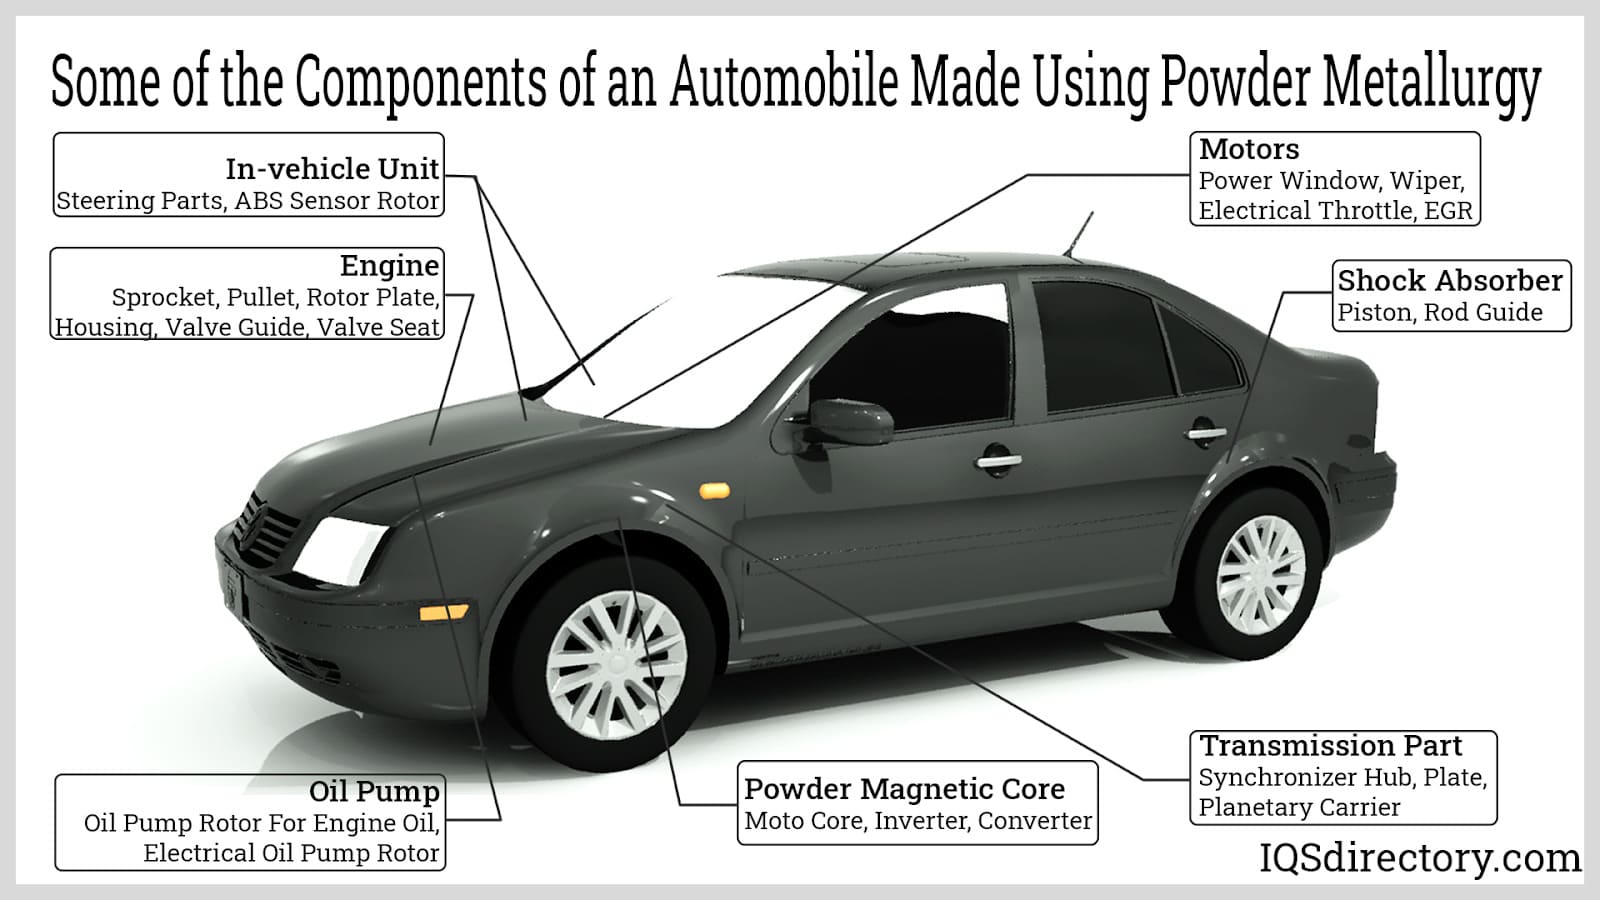 Some of the Components of an Automobile Made Using Powder Metallurgy